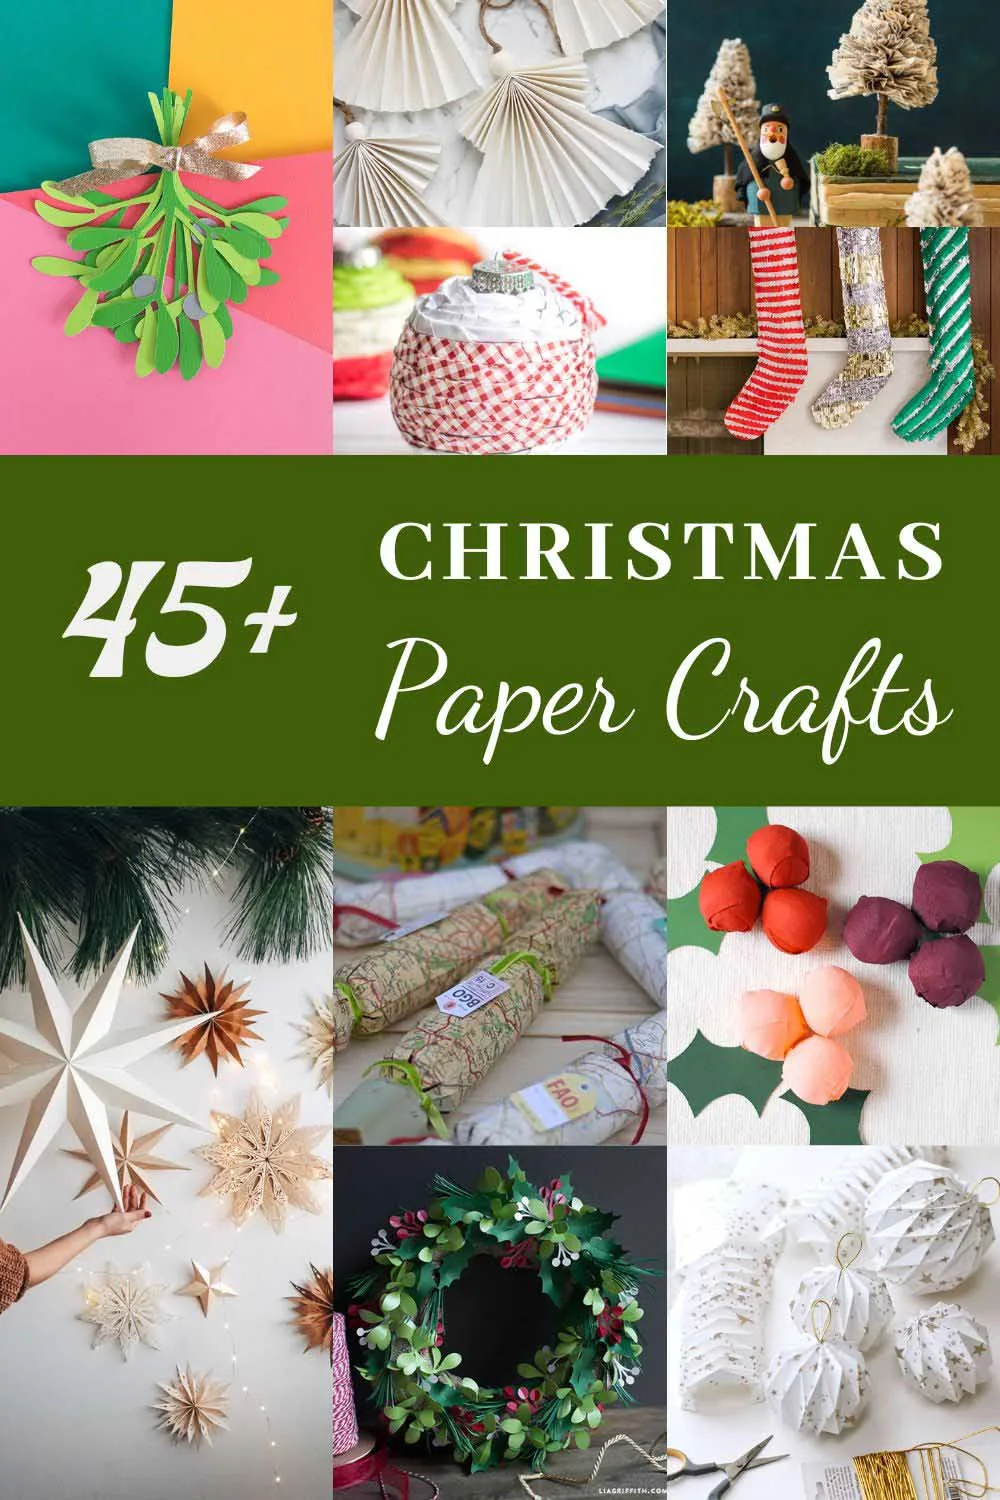 Eco friendly decorations - recycled craft wrapping paper, berry